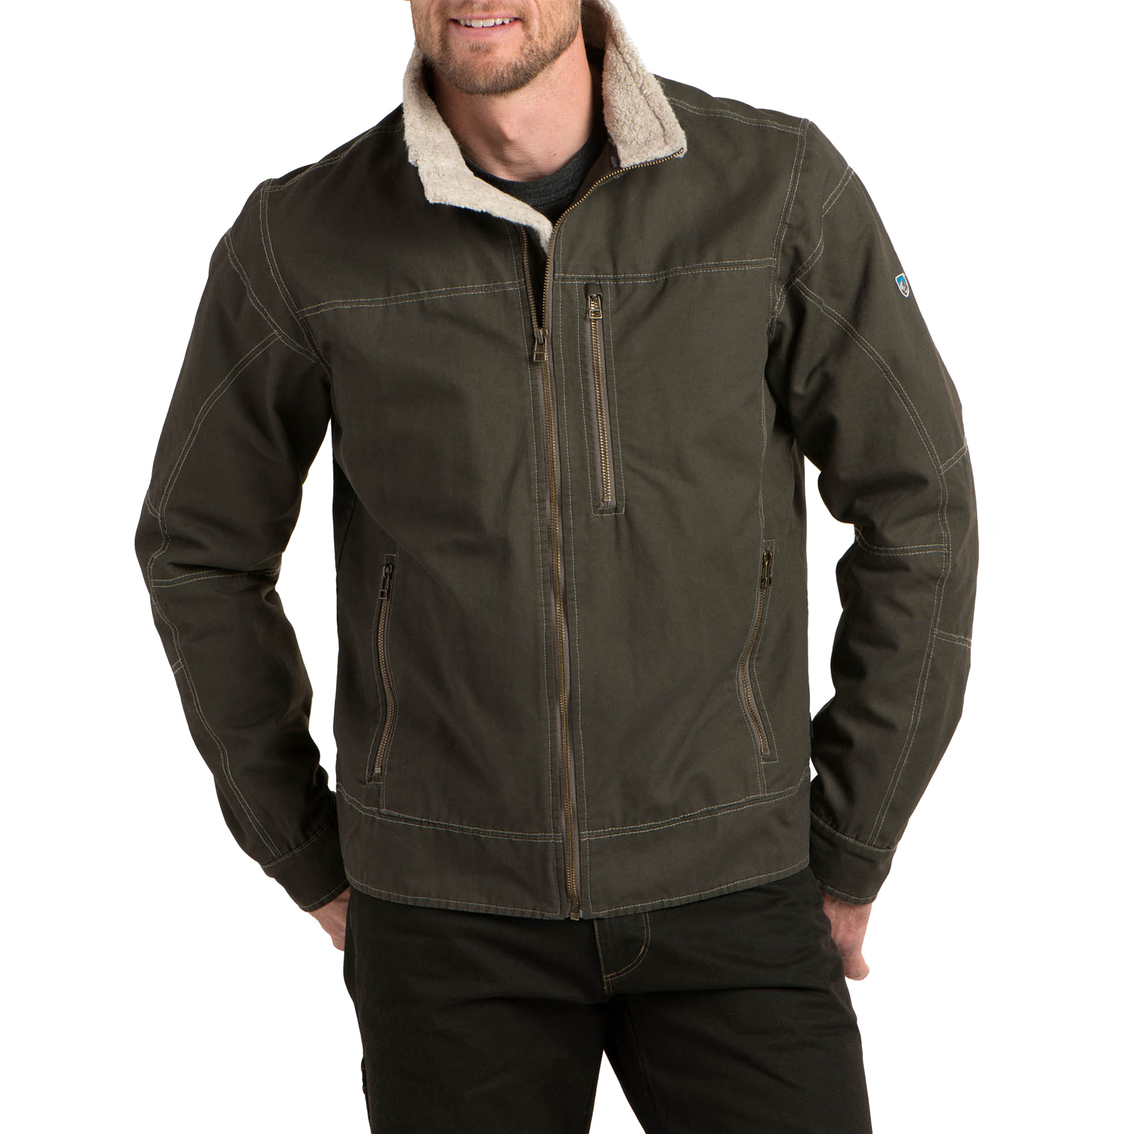 Kuhl Burr Lined Jacket, Jackets, Clothing & Accessories